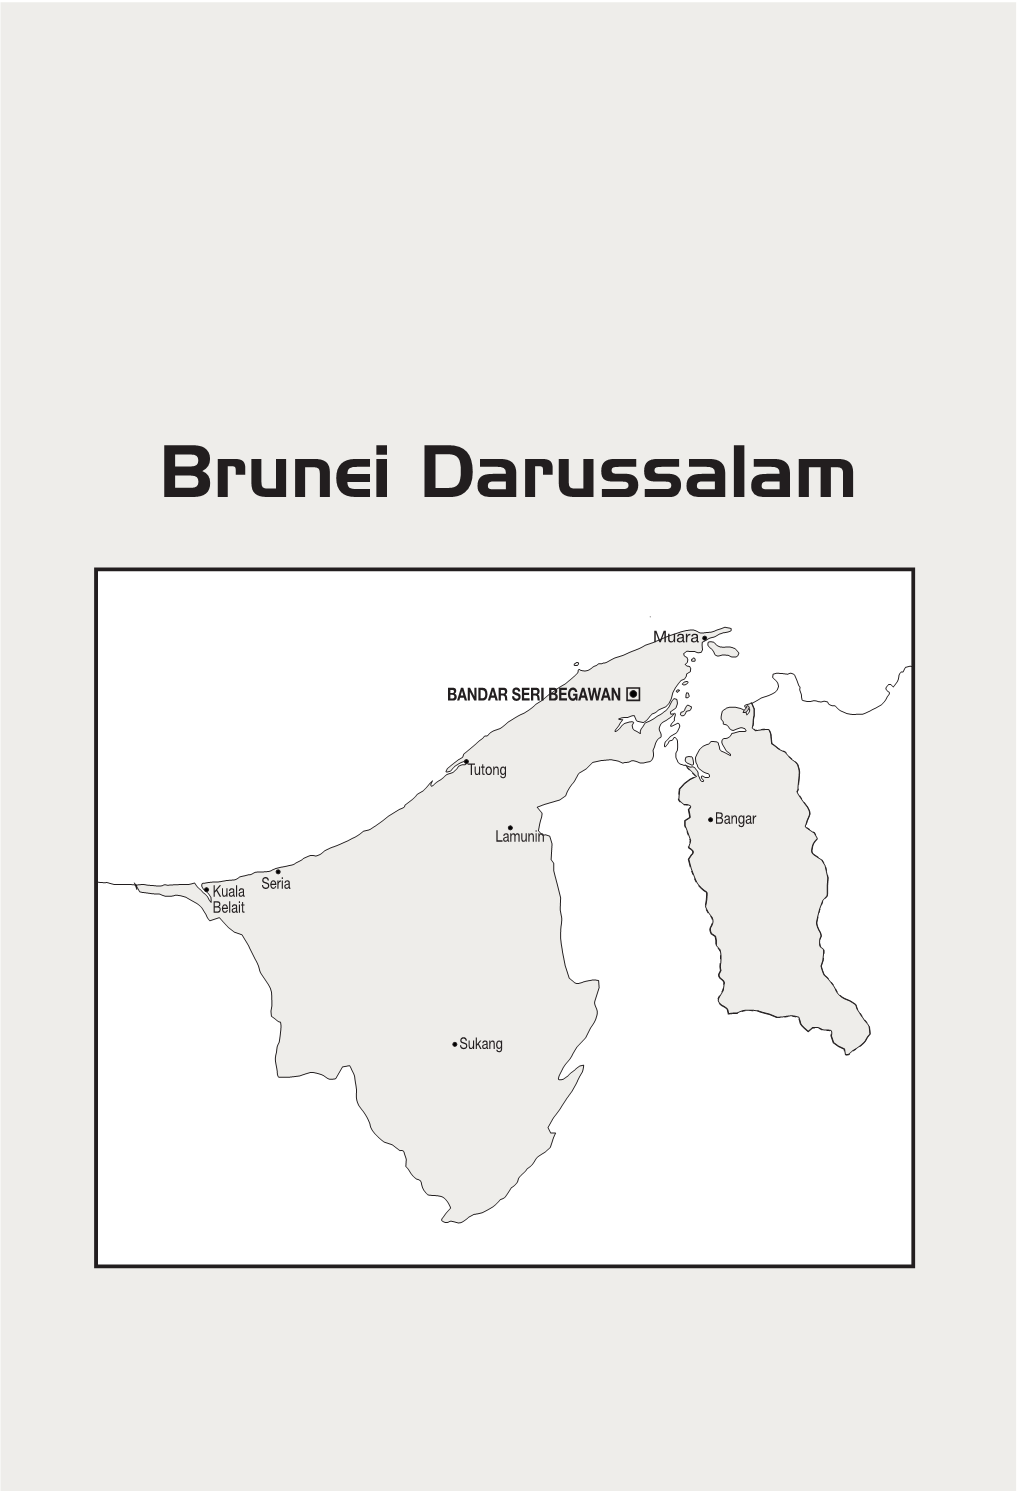 Brunei in 2013 Paradoxes in Image and Performance?